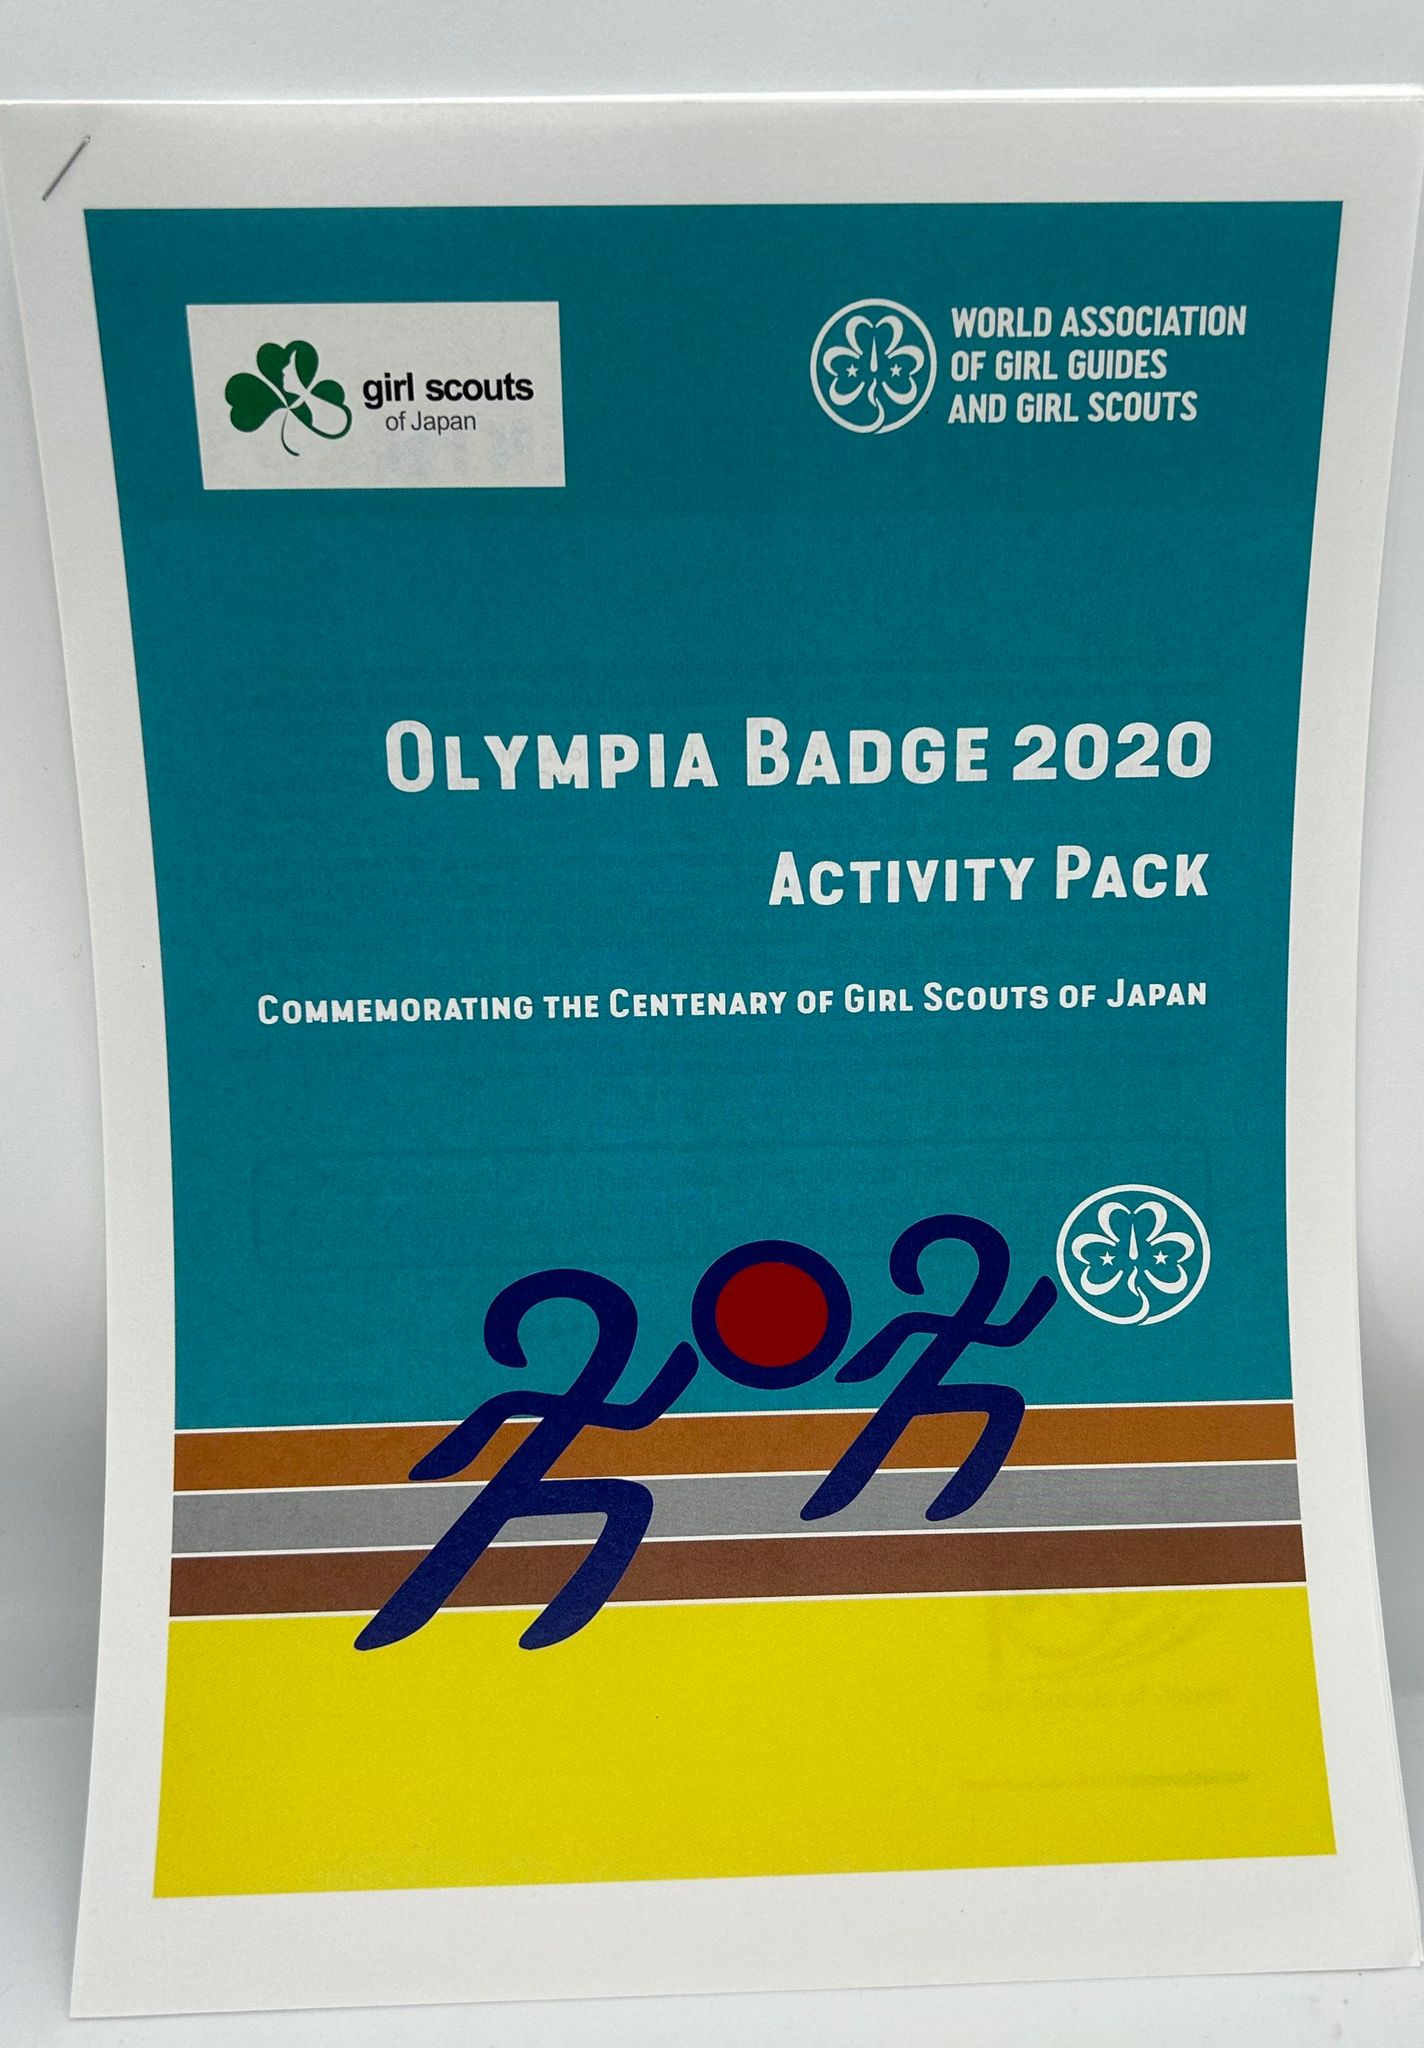 Olympia badge activity pack is a resource of olympic activities